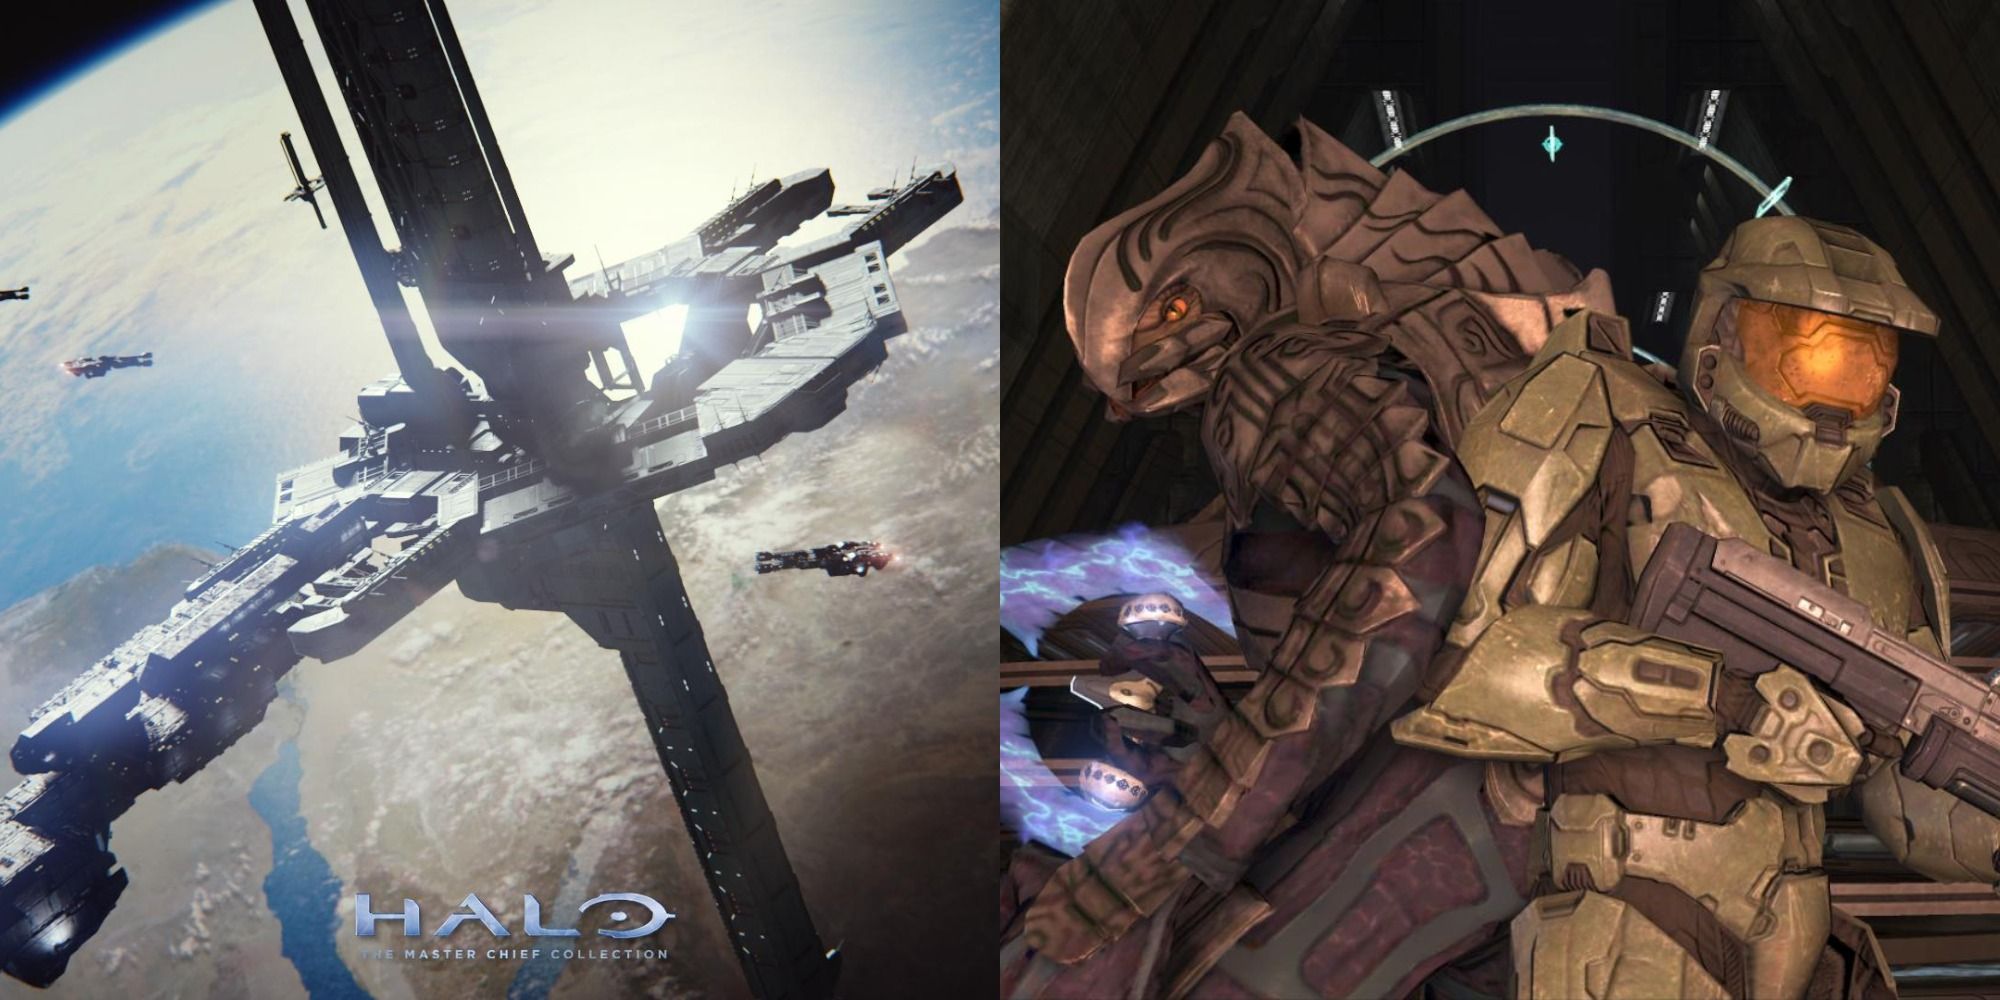 Split image showing the Cairo Station and two characters from the Halo franchise